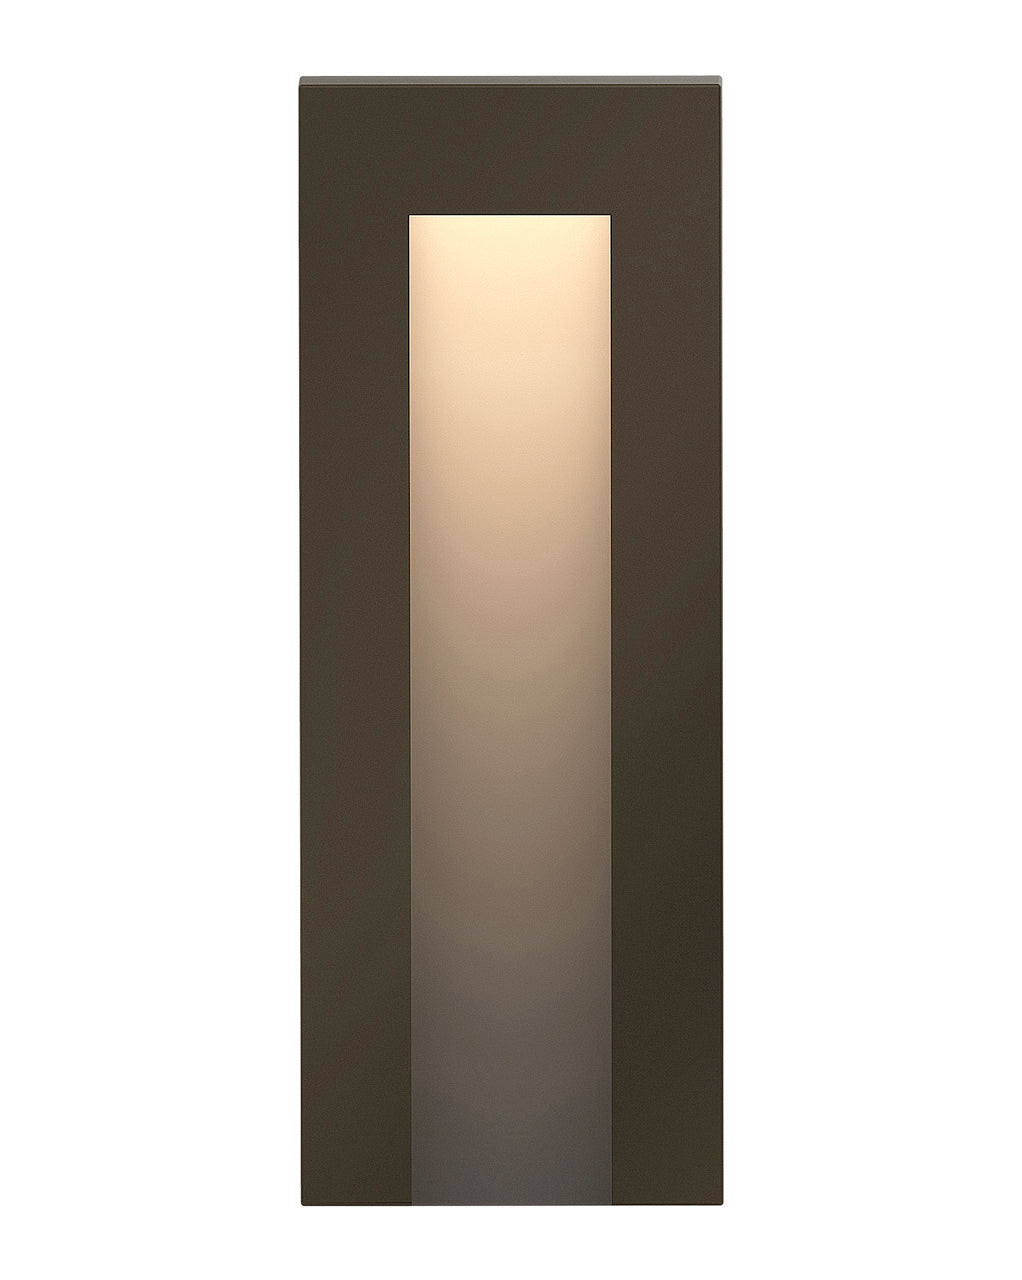 Hinkley  Taper Deck Sconce 12v Tall Vertical Outdoor l Wall Hinkley   